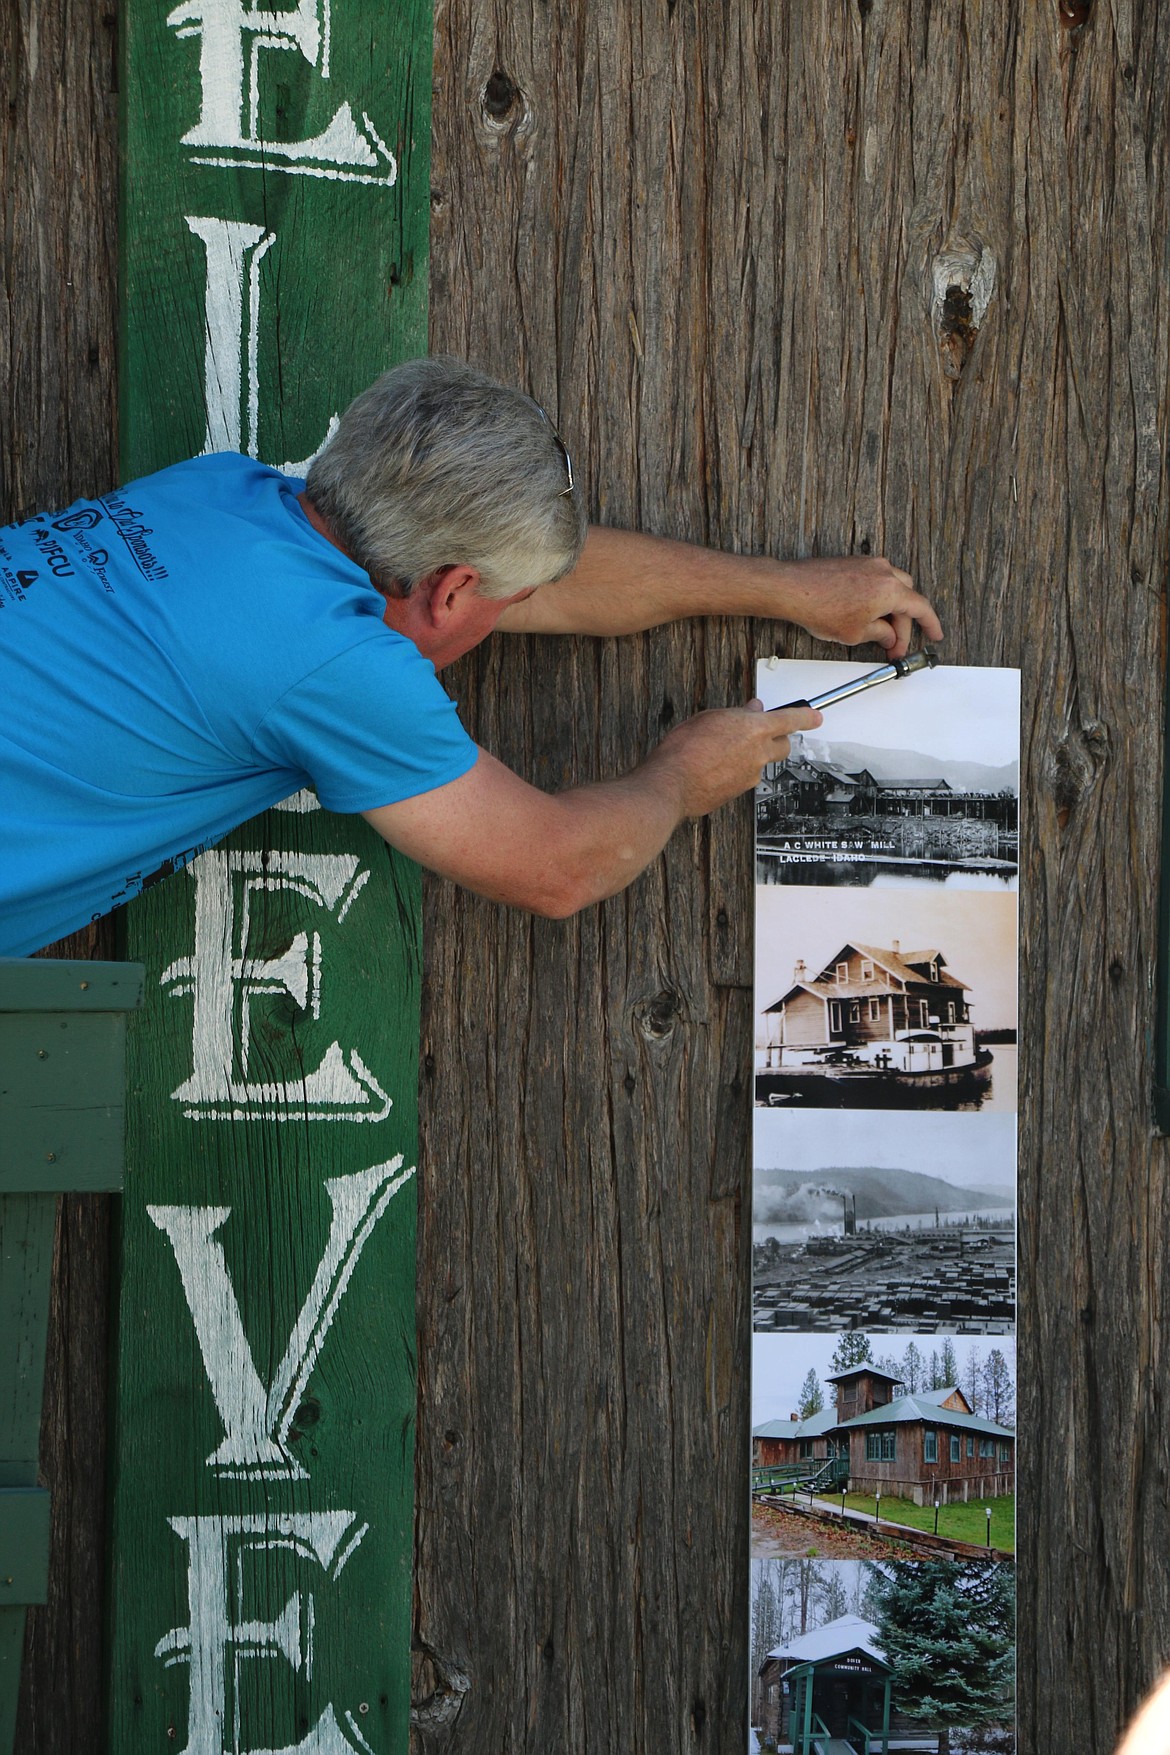 A Dover resident puts up a display of historic photos showing Dover's early days in preparation for a community barbecue.